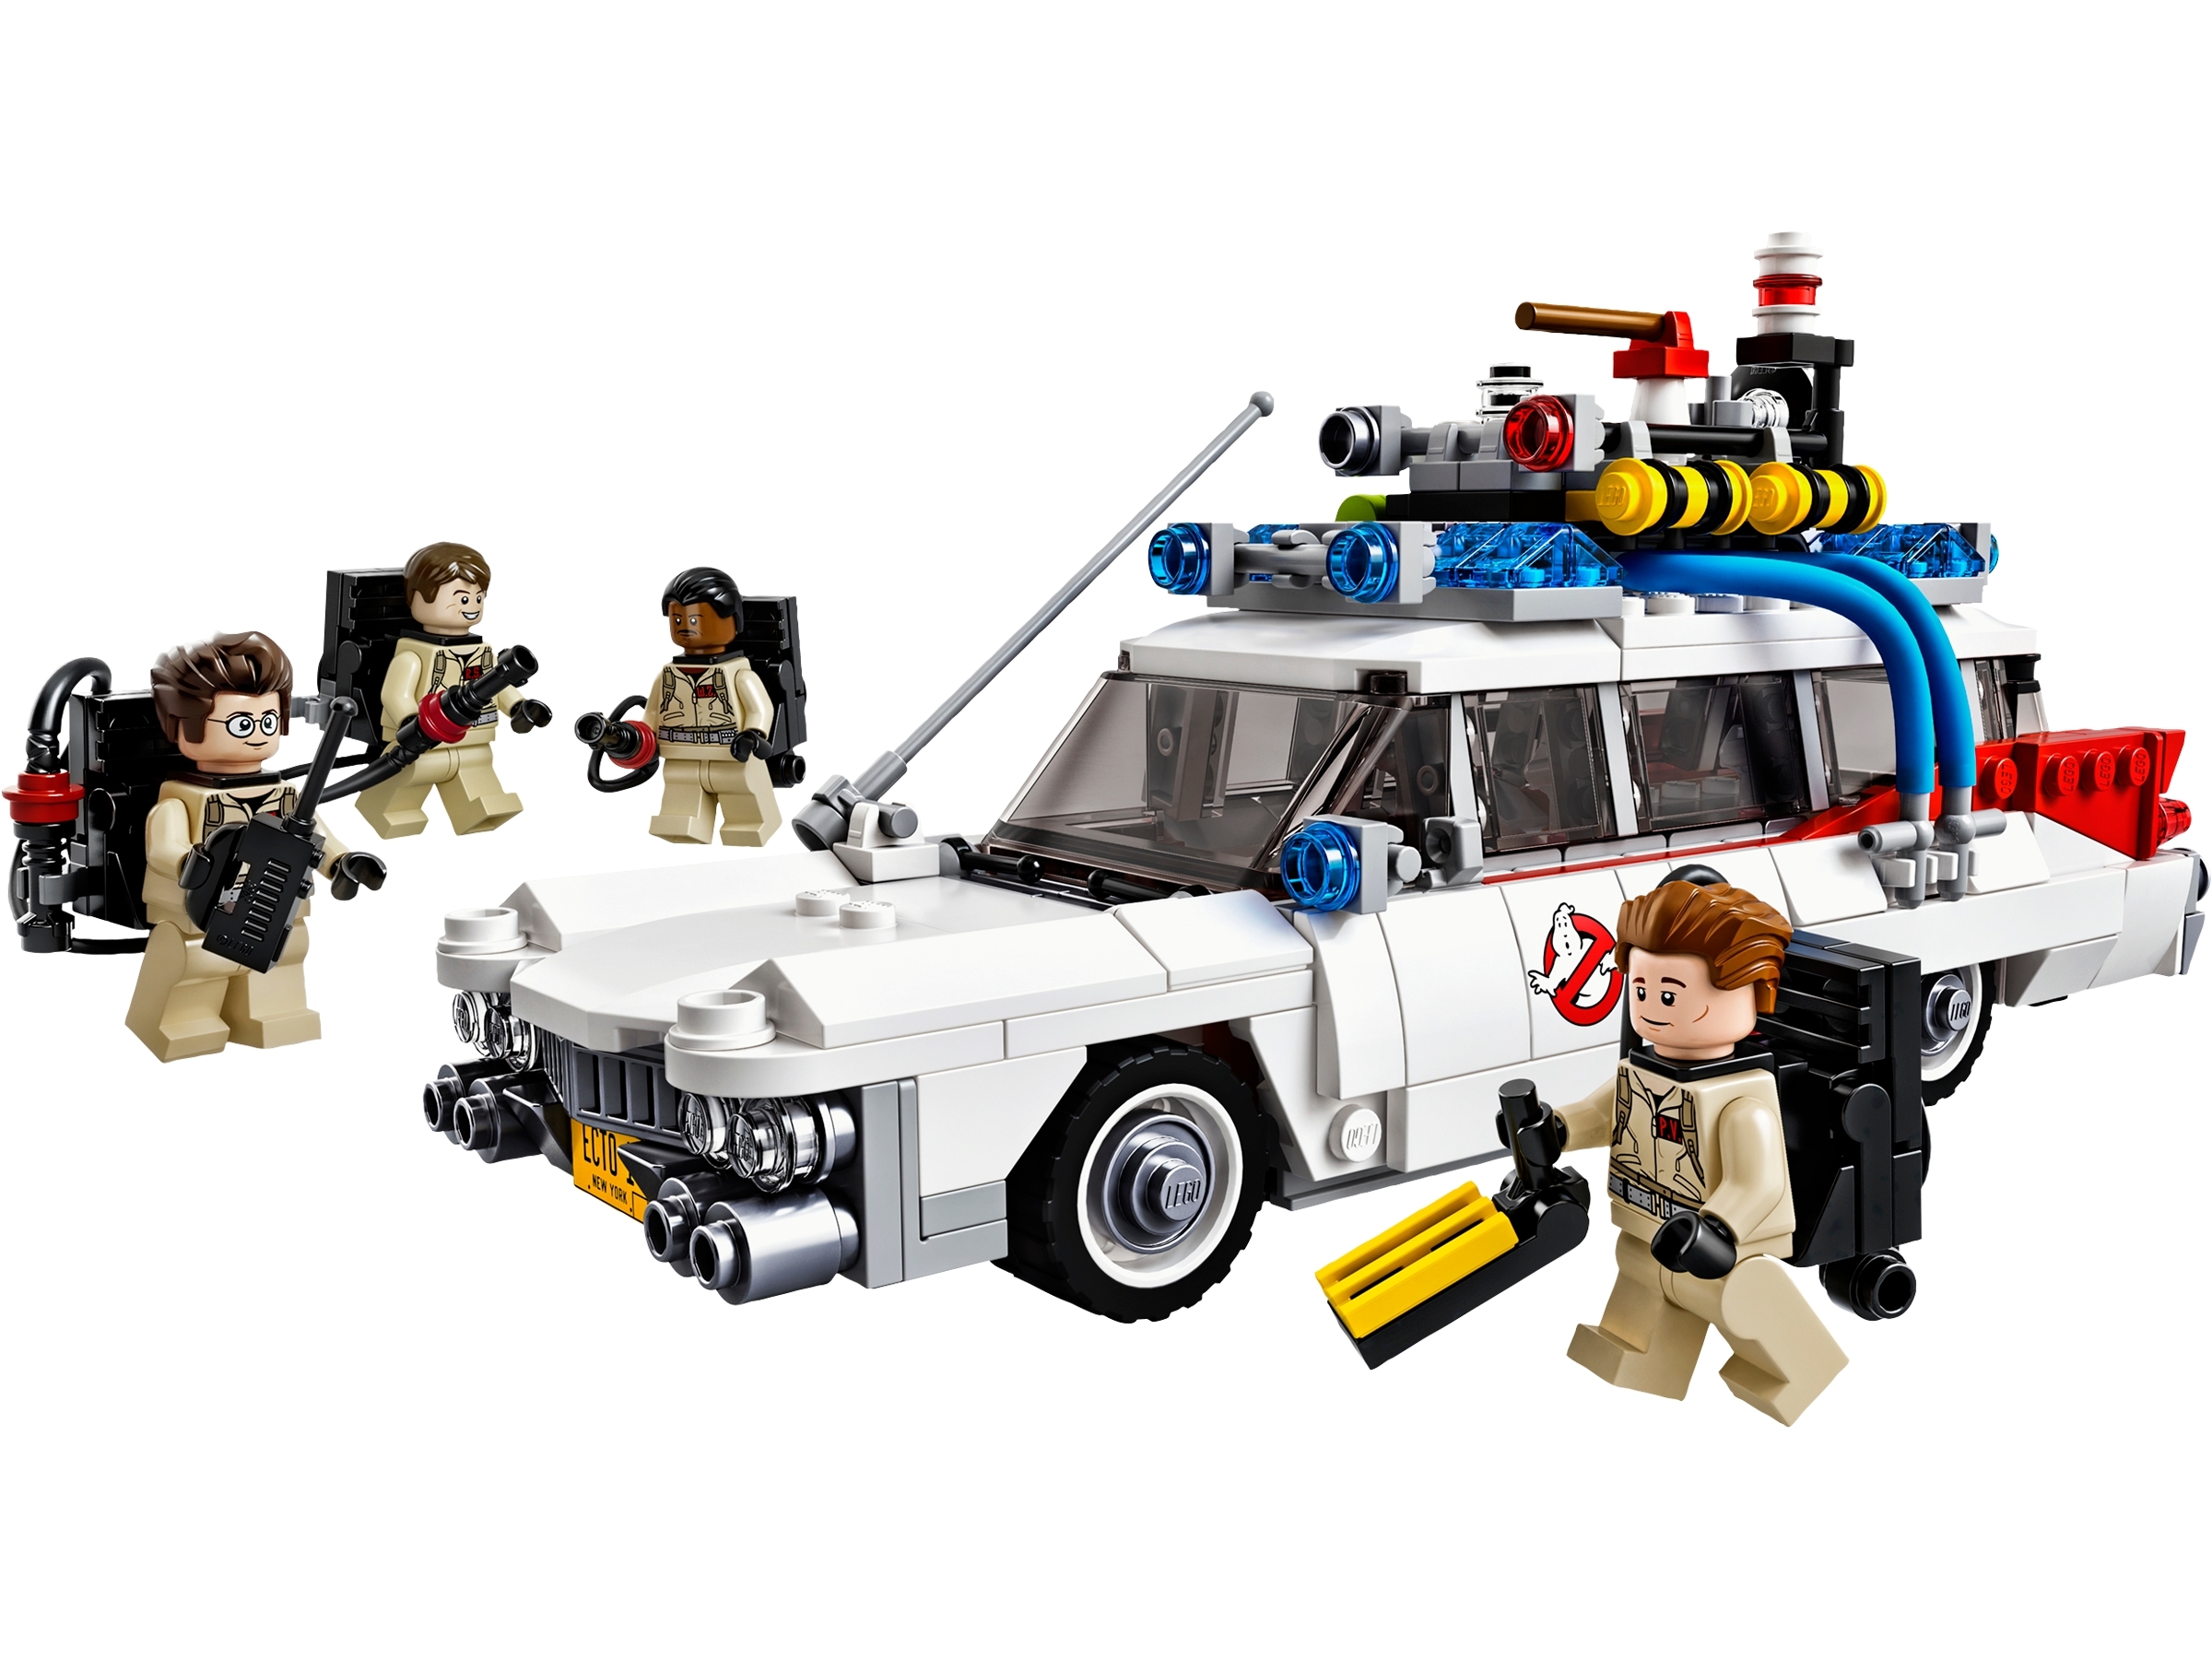 No Minifigures LEGO Ghostbusters Minifigure Stand From Set 21108 